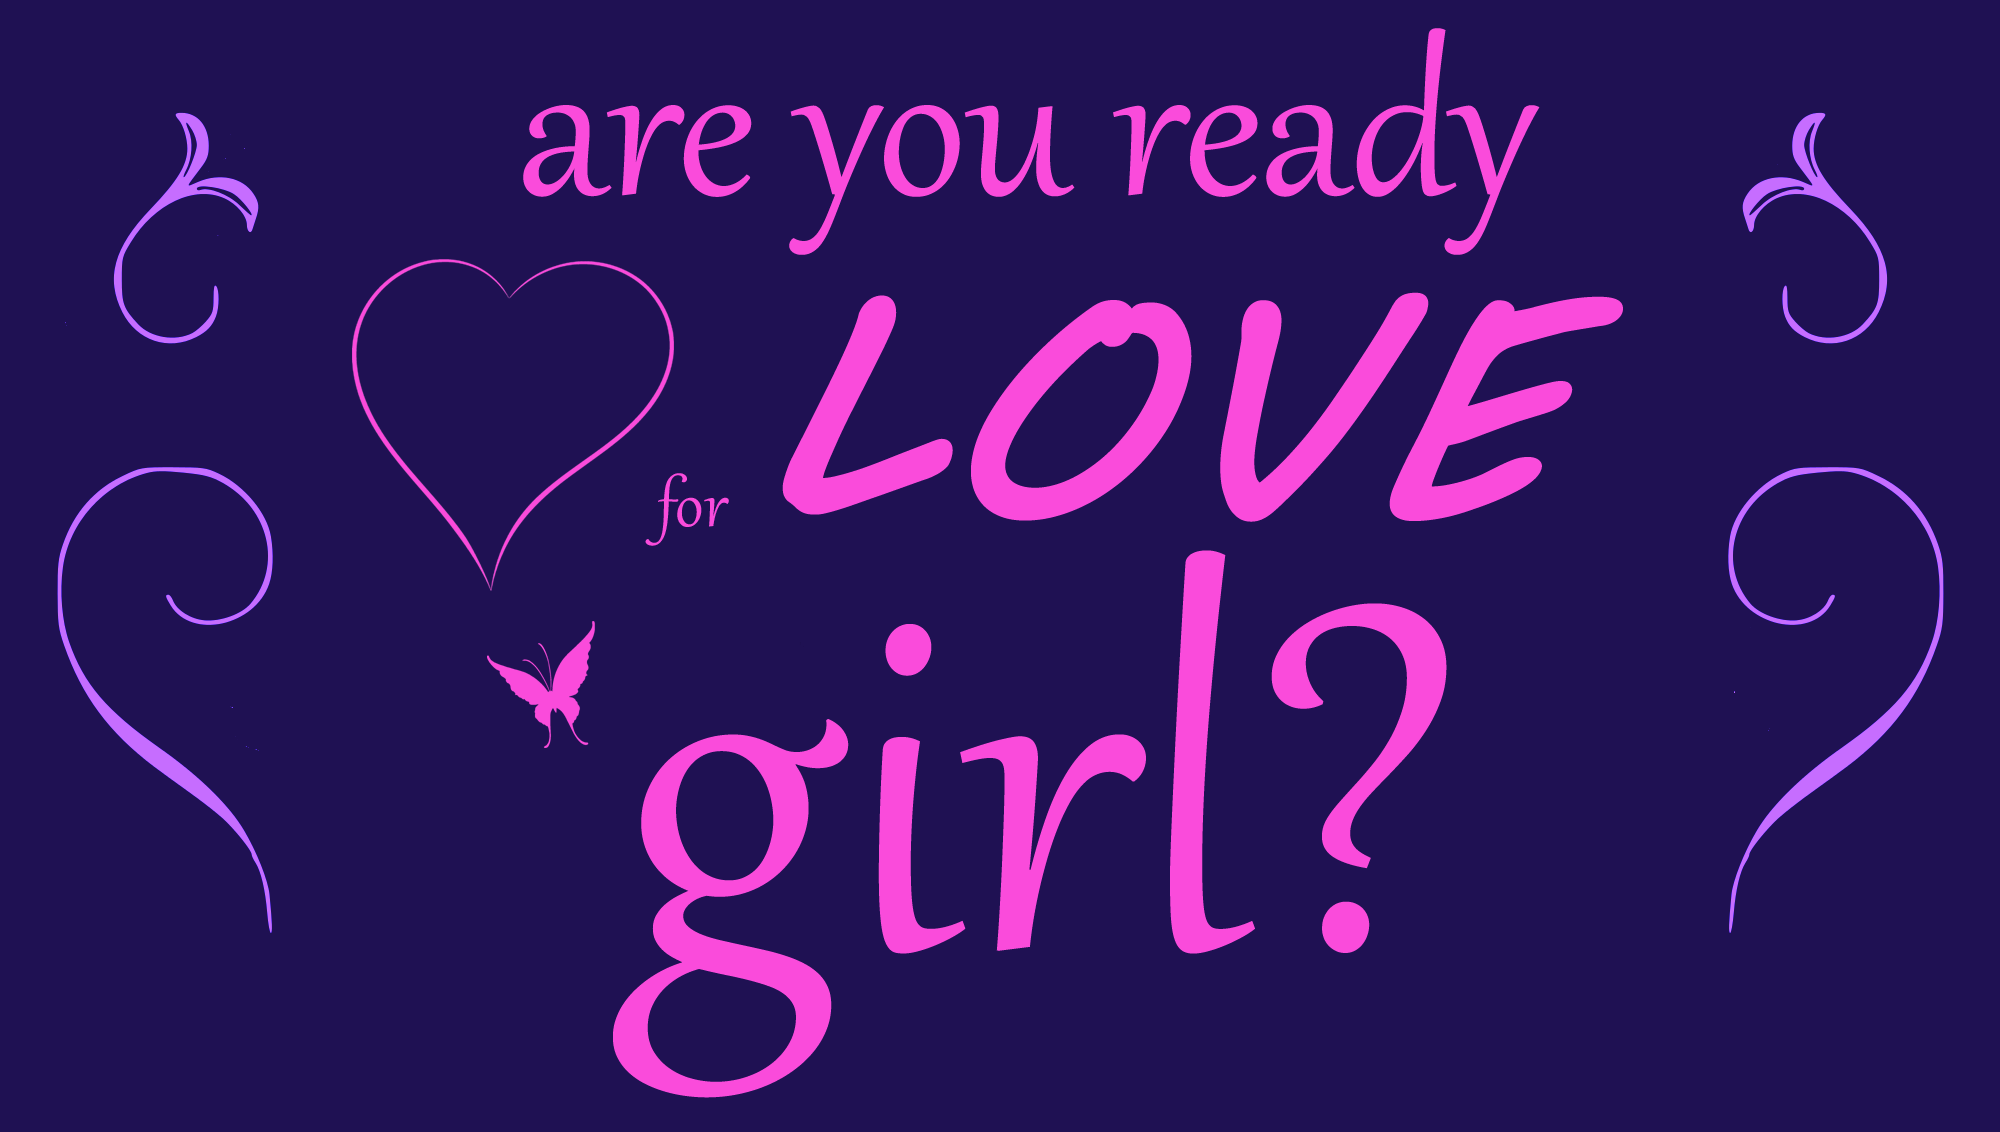 Are You Ready For Love, Girl?